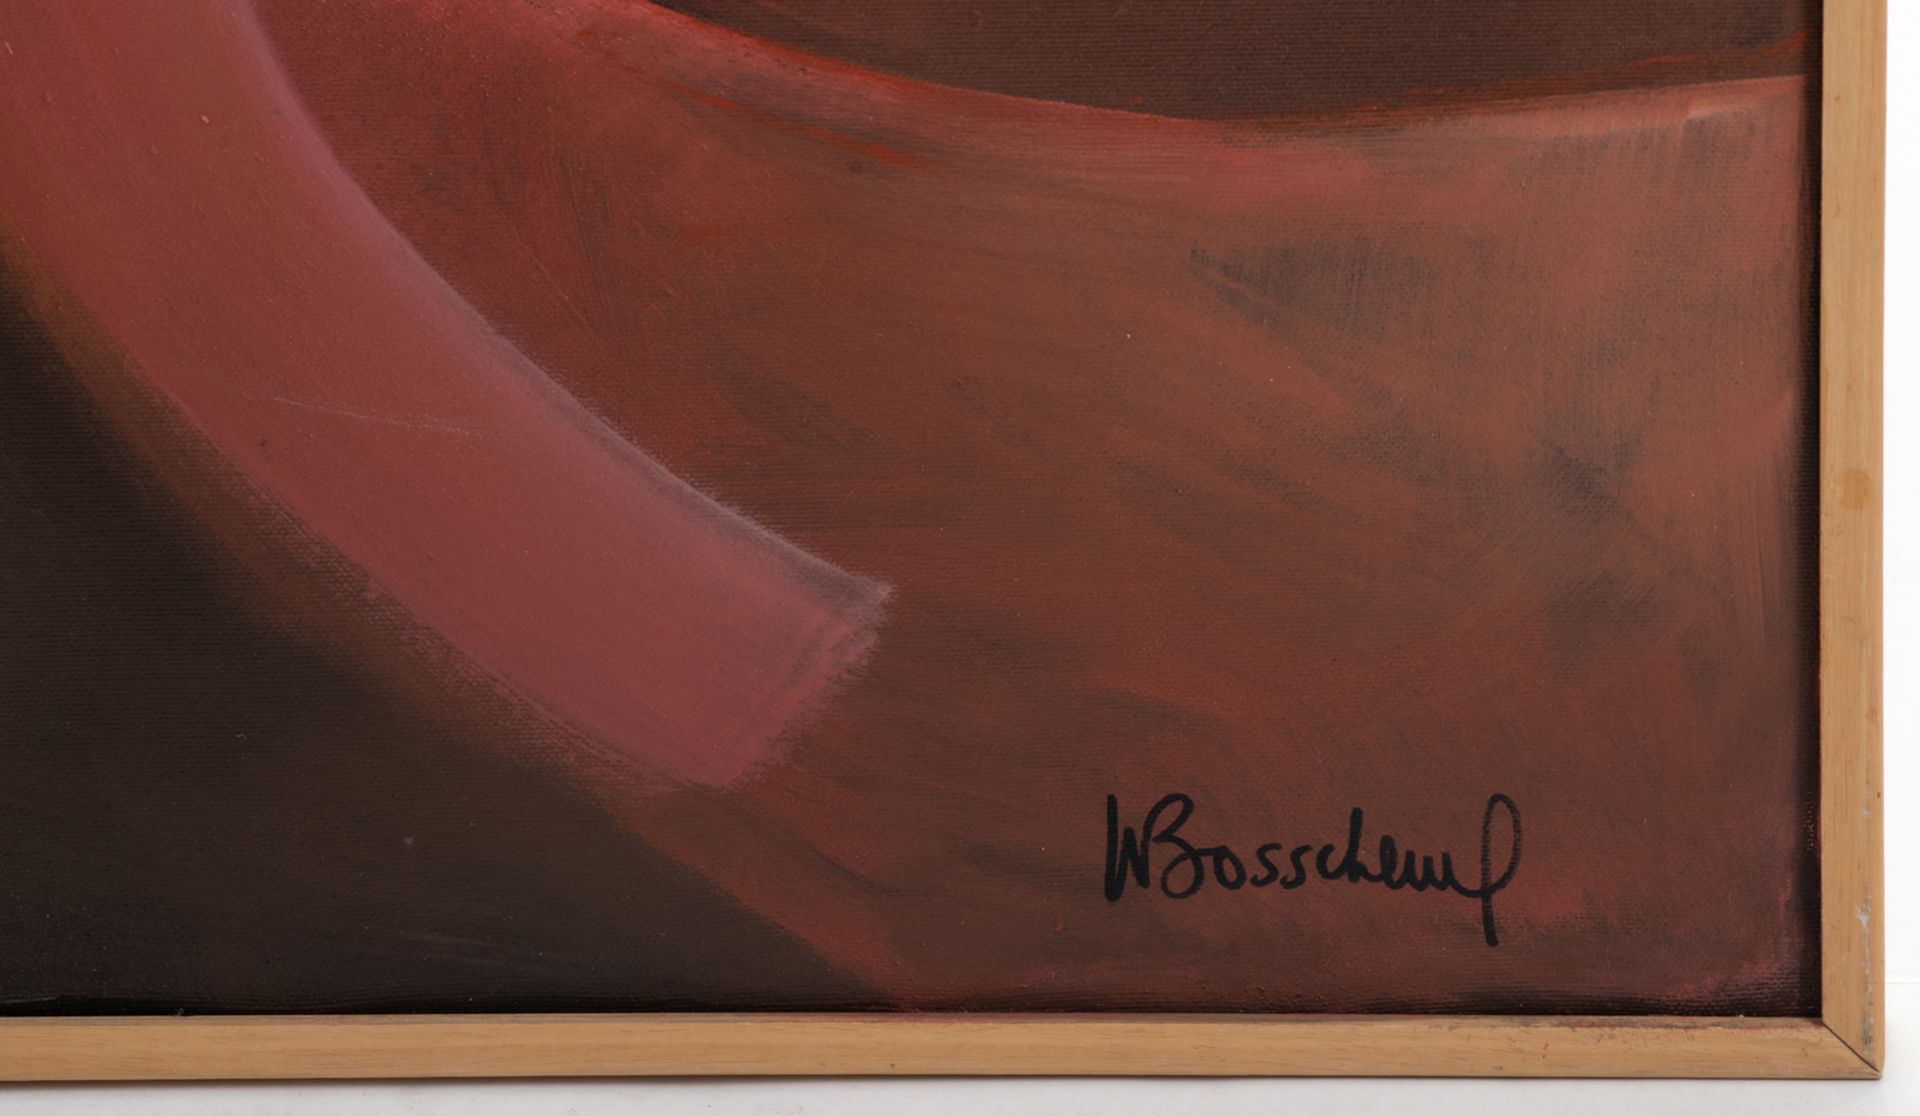 Bosschem W., 'Vrouw met wit kleed' (a woman in a white dress), oil on canvas, dated 1991, 90,5 x - Image 4 of 4